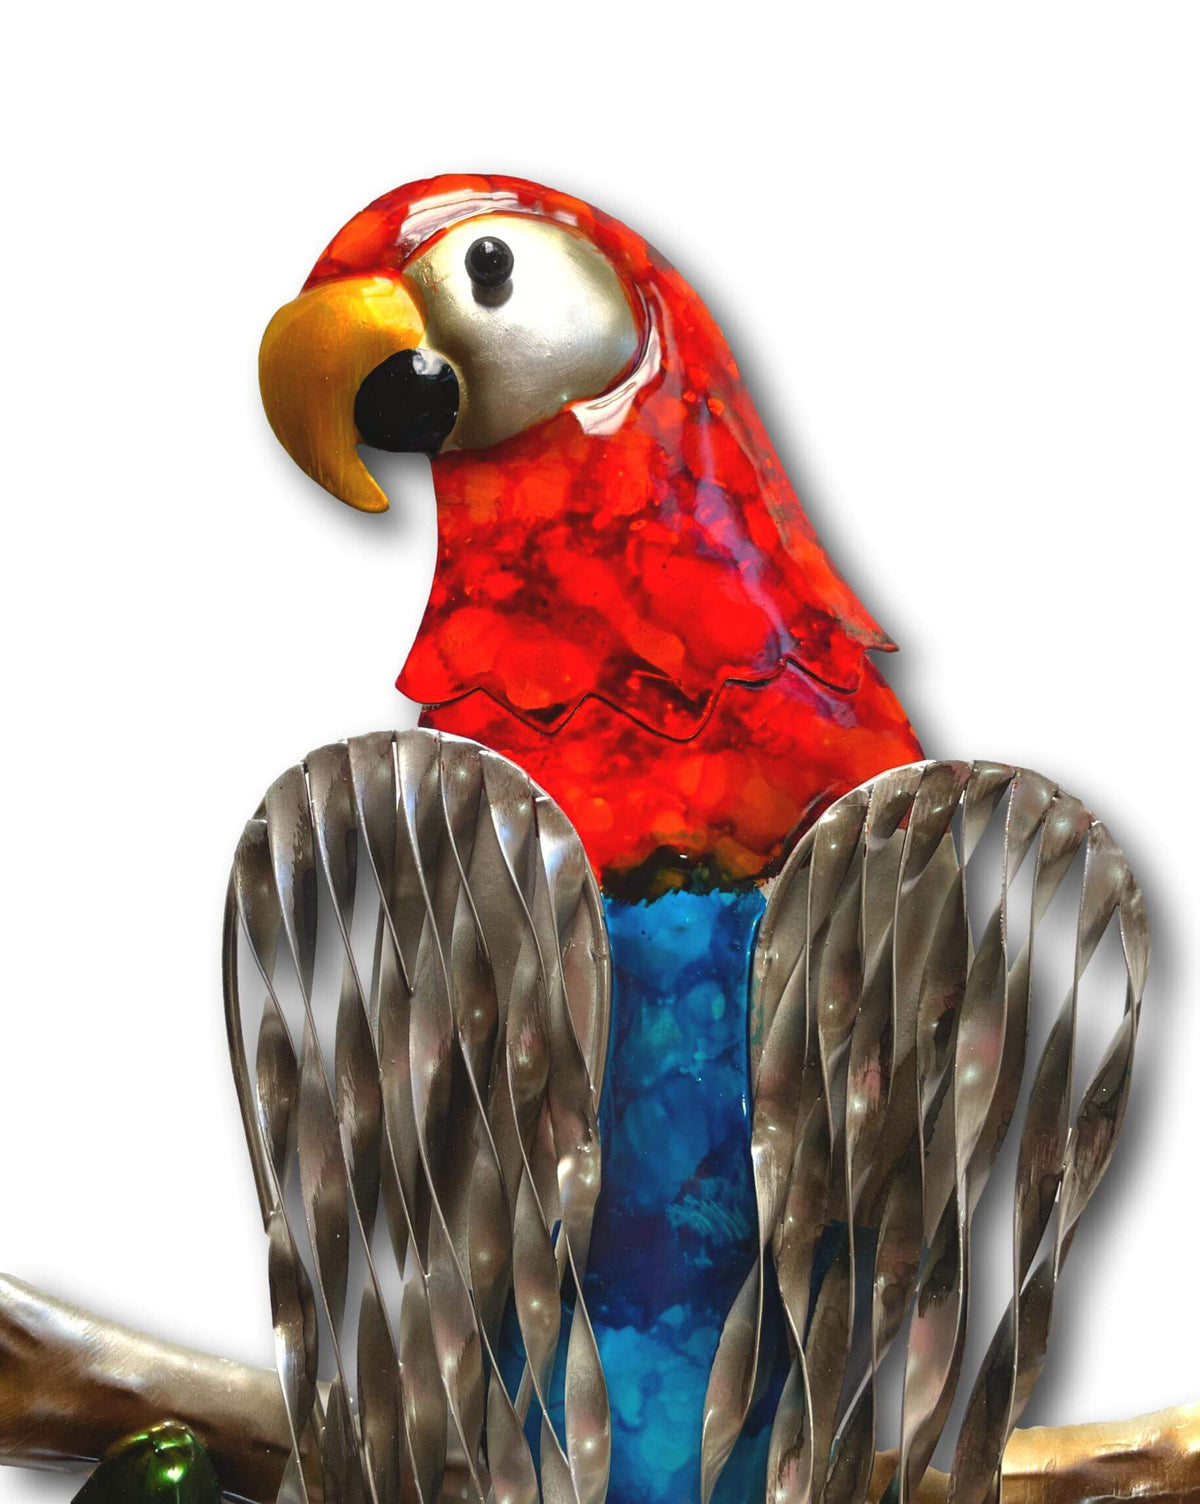 TWO COLOURFUL MACAW PARROTS WALL ART SET - HANDMADE METAL ART + SINGING BOWLS AND MEDITATION